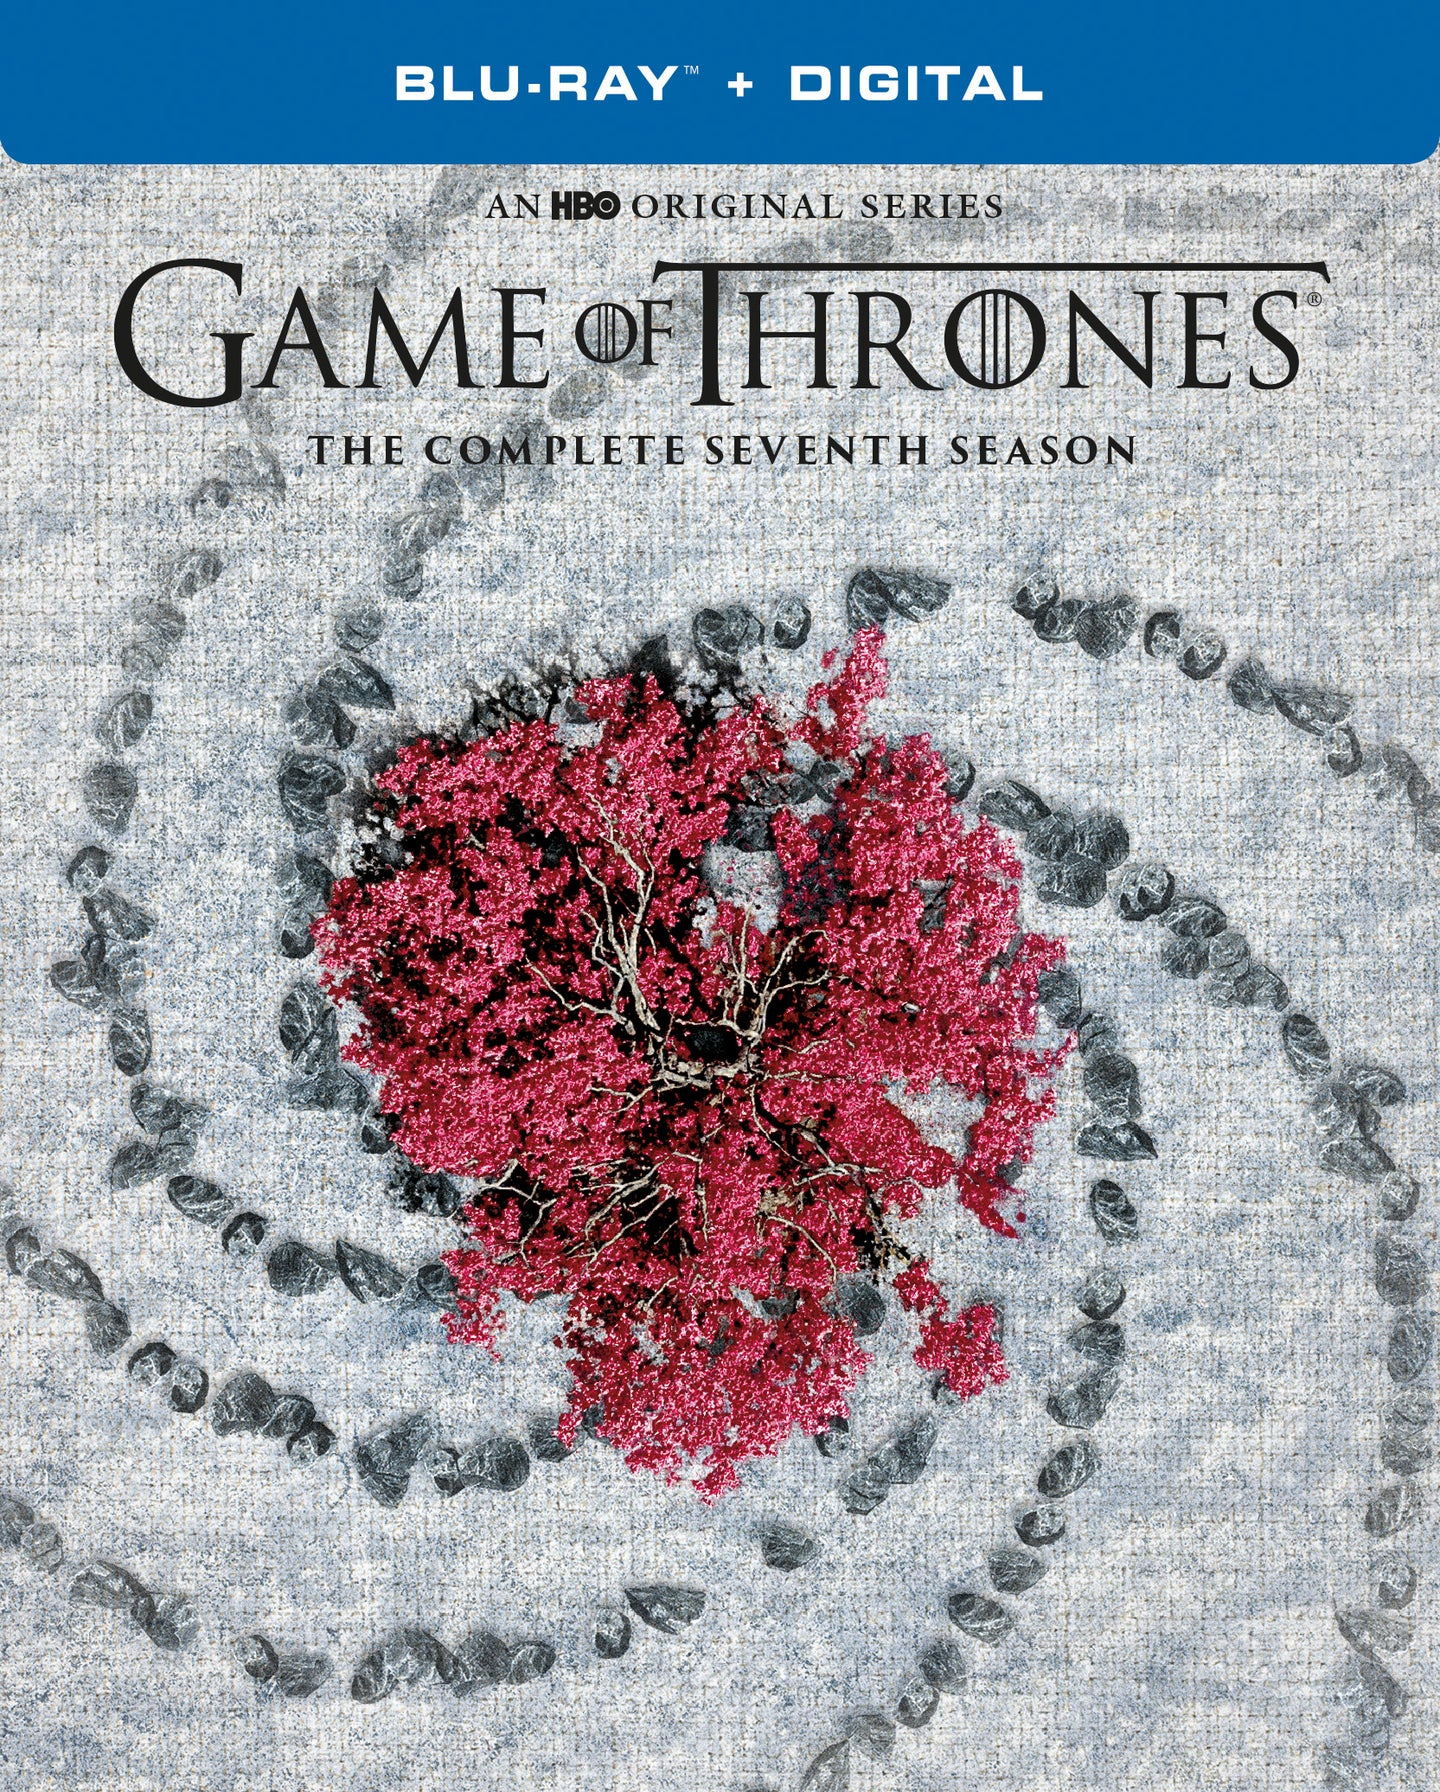 Game of Thrones: The Complete Seventh Season (2017) iTunes HD redemption only